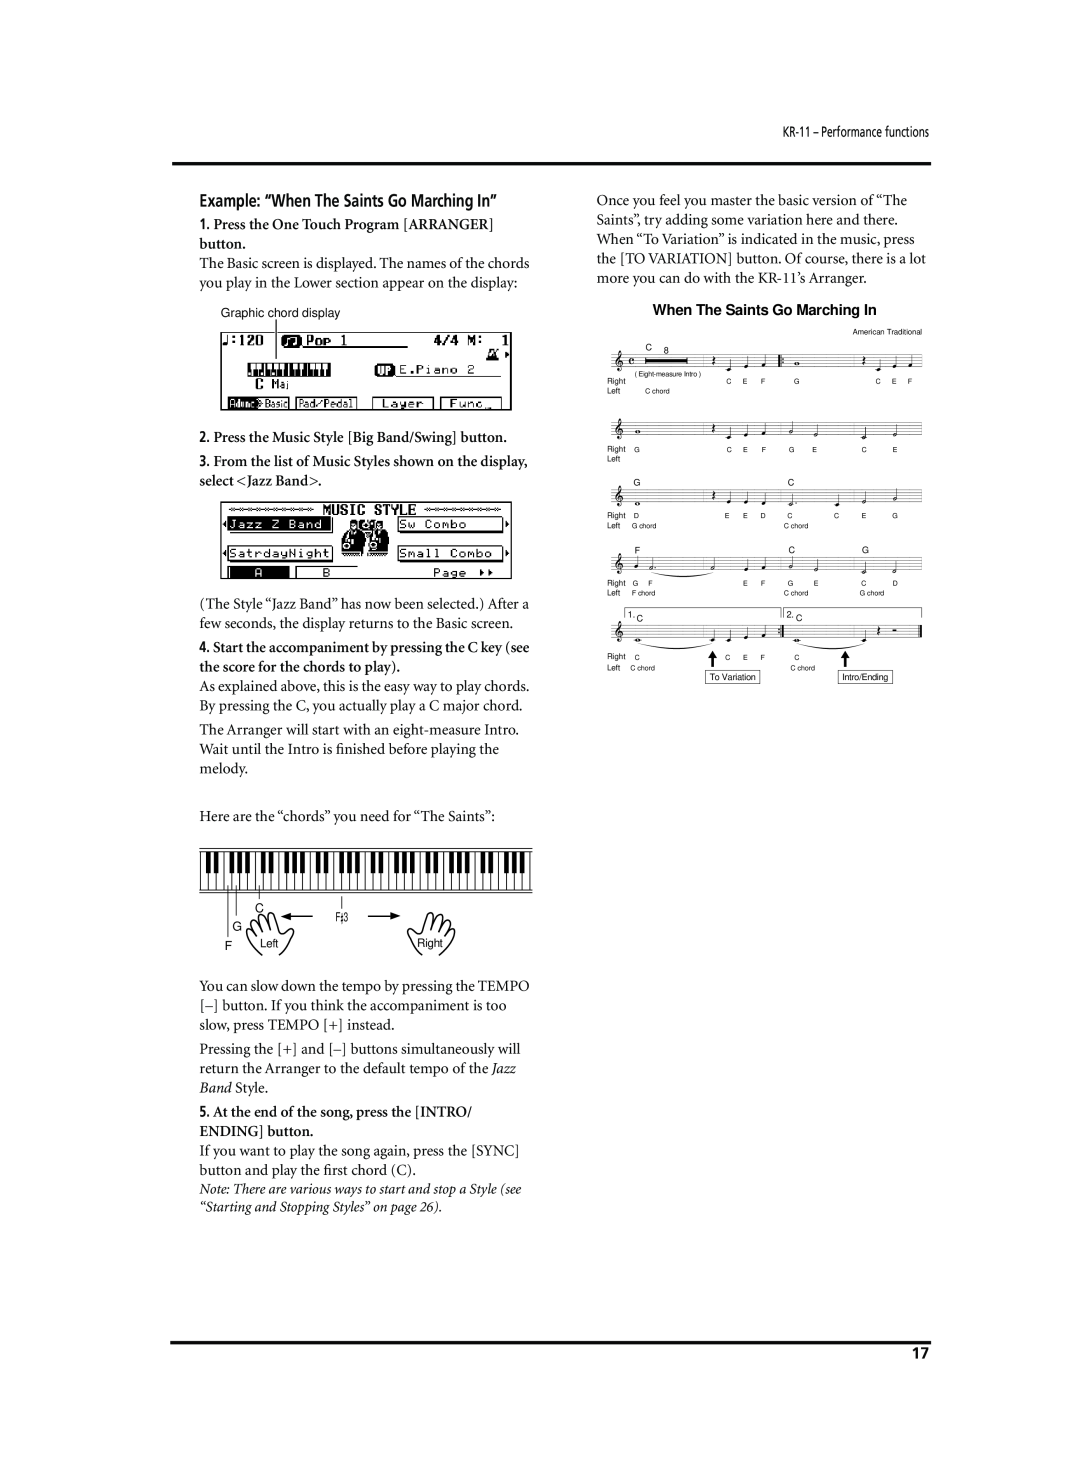 Roland KR-11 owner manual Example “When The Saints Go Marching In”, Press the One Touch Program ARRANGER button 